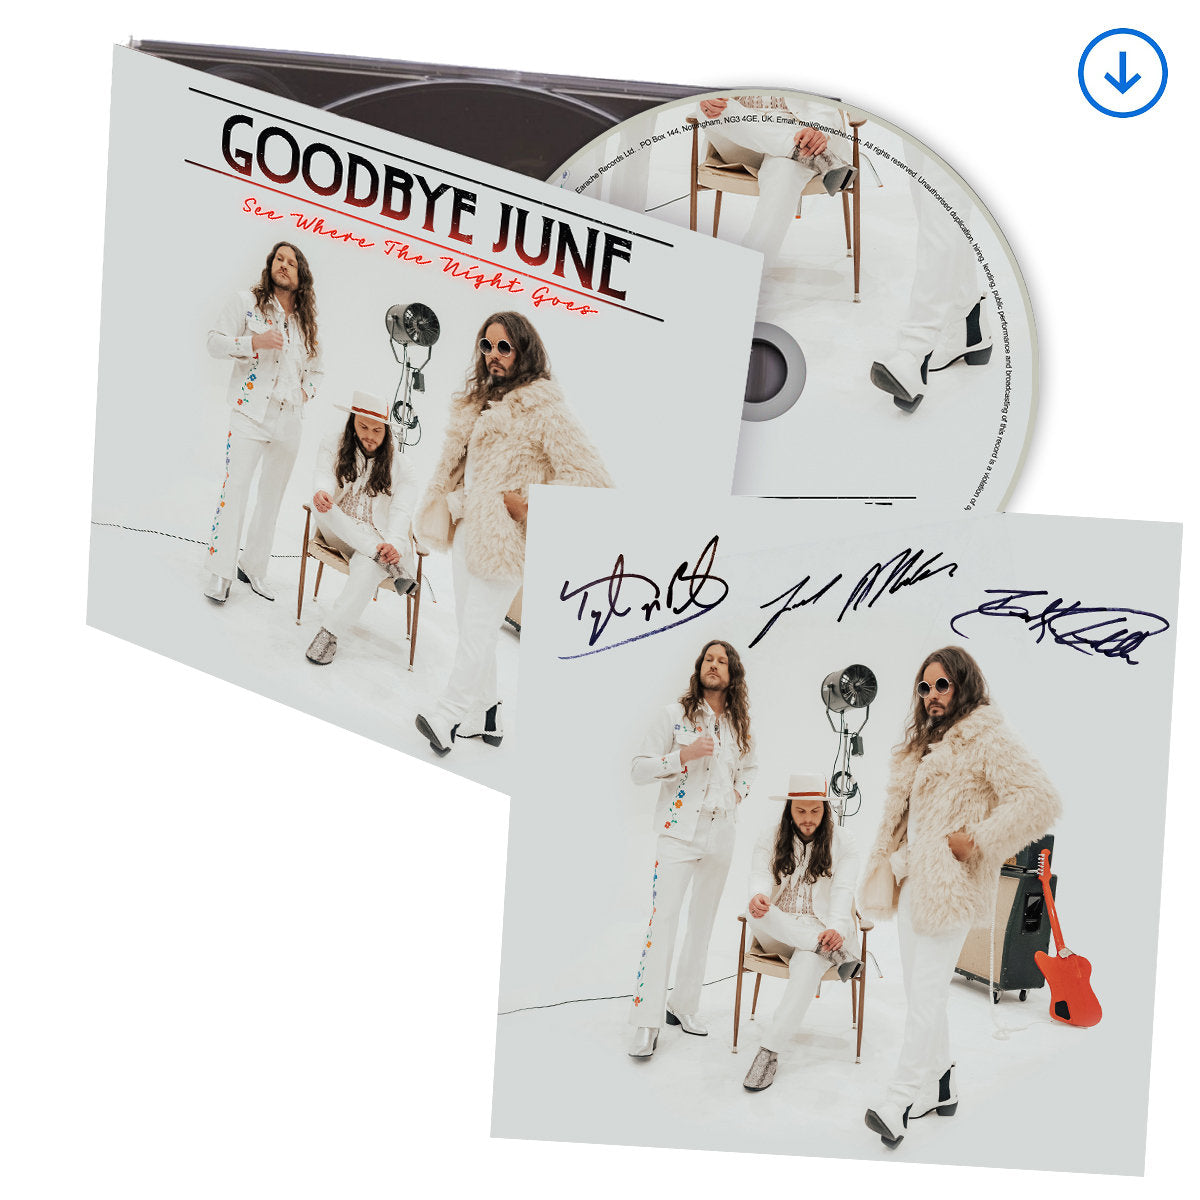 Goodbye June "See Where The Night Goes" SIGNED CD